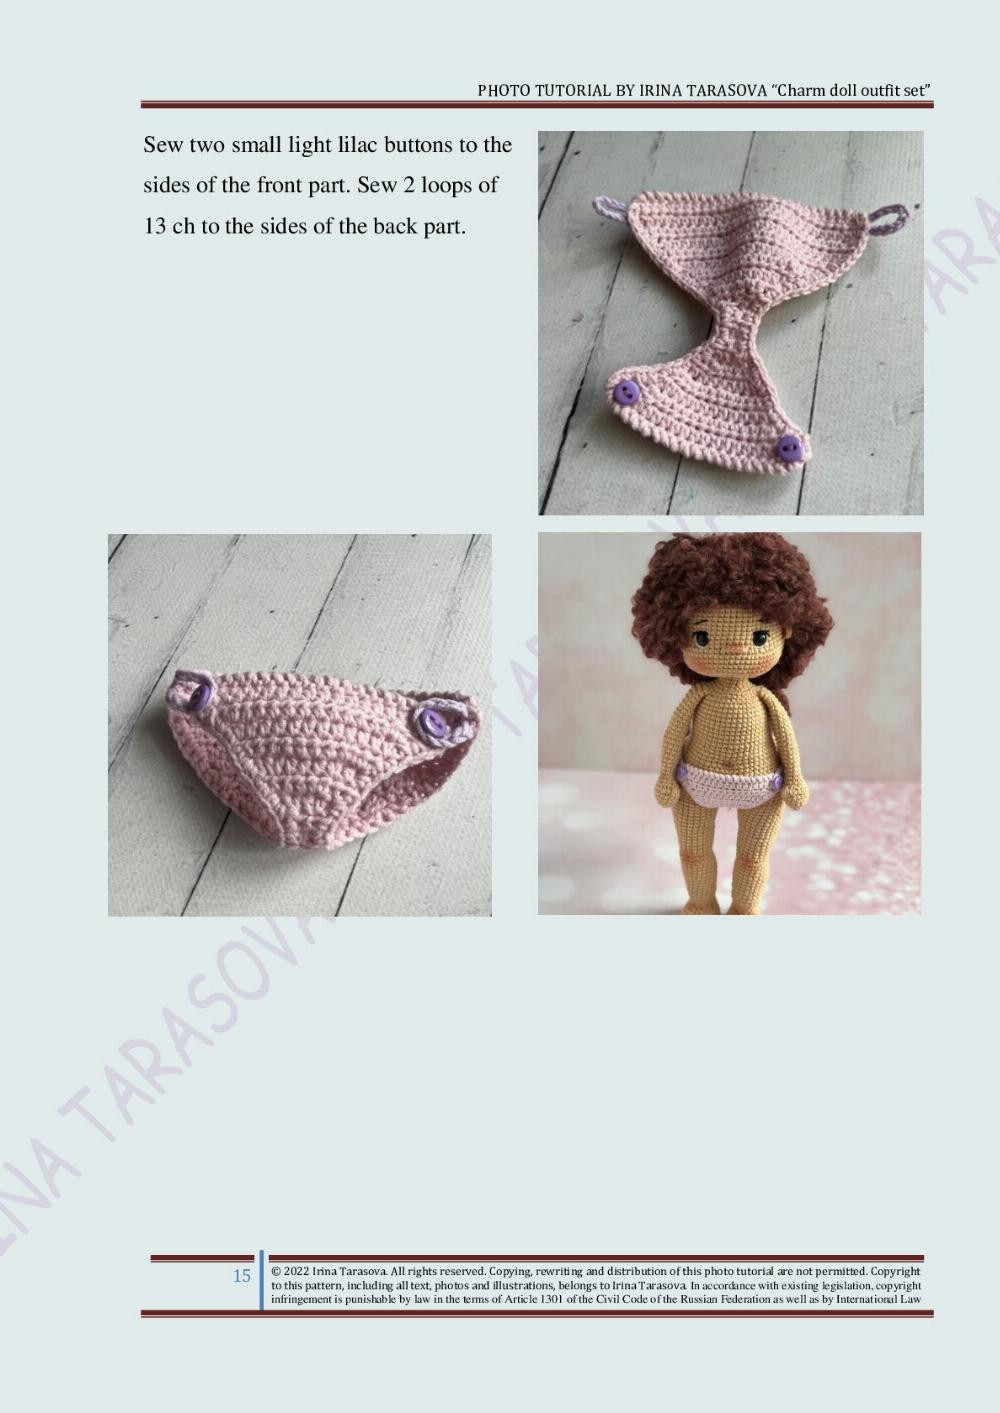 Charm doll outfit set crochet pattern